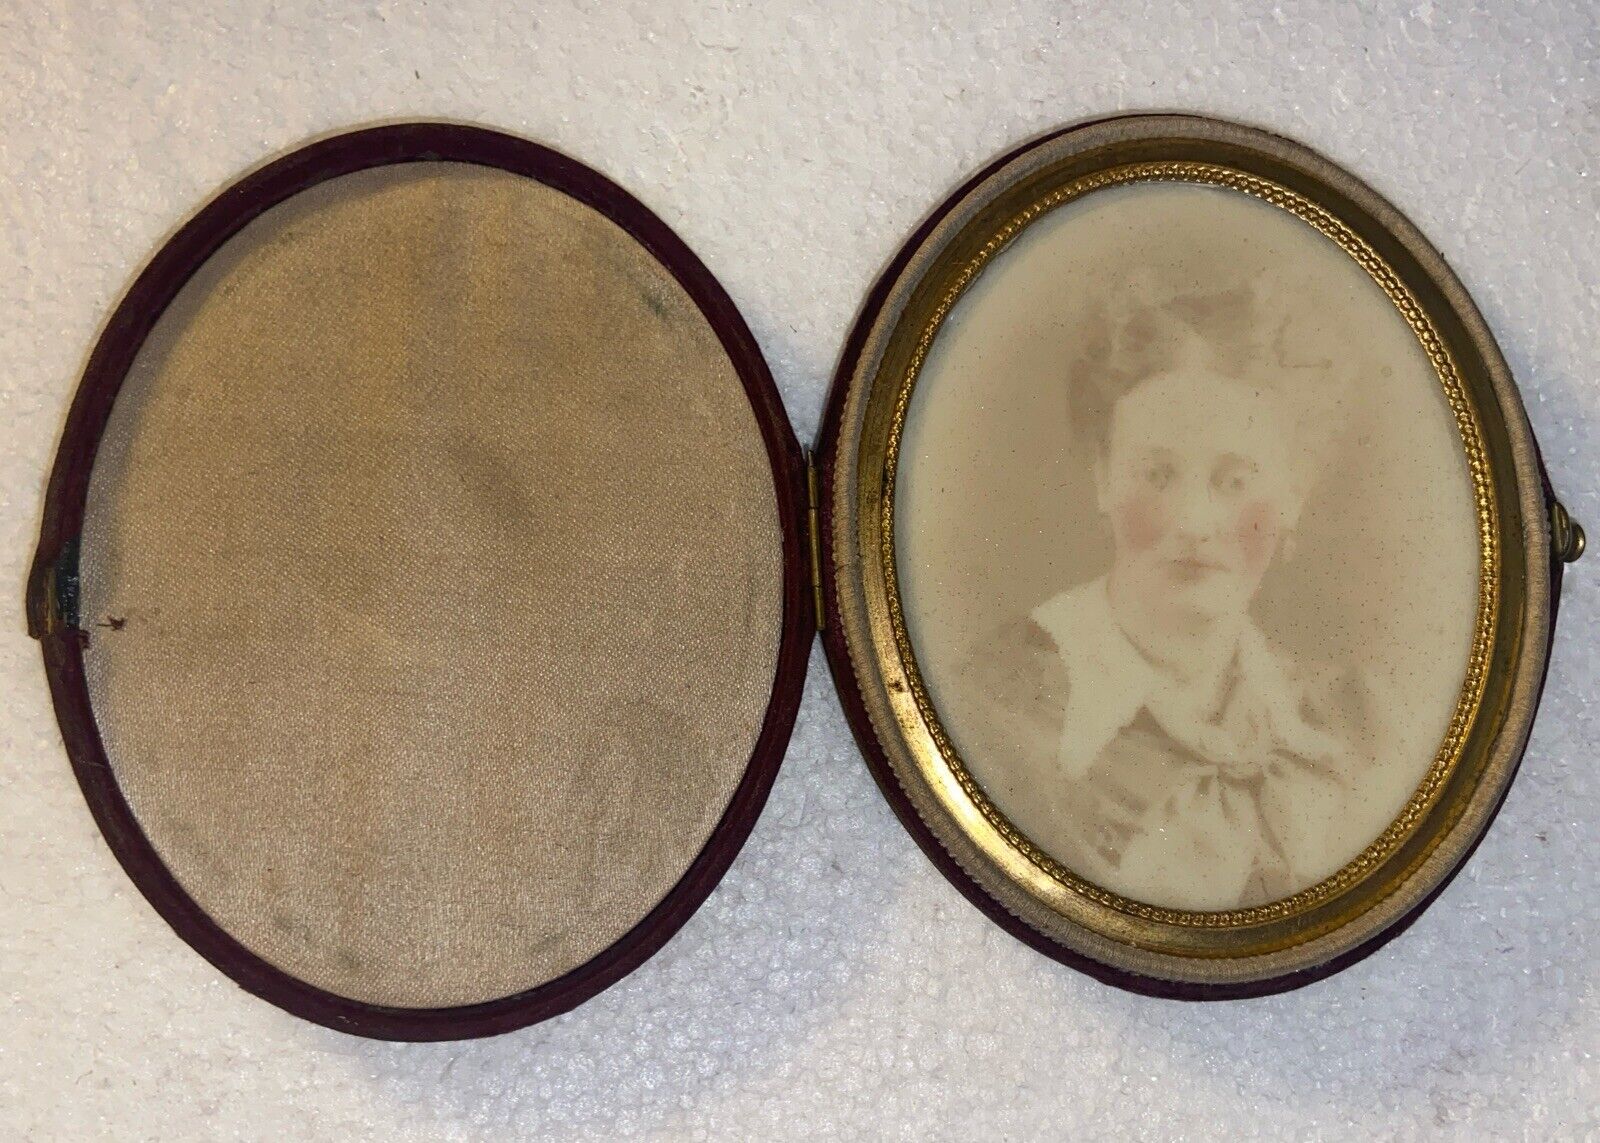 Photo of a Woman On Porcelian in Oval Velvet Case Circa 1850s-1860s Apprx 4”x 3”